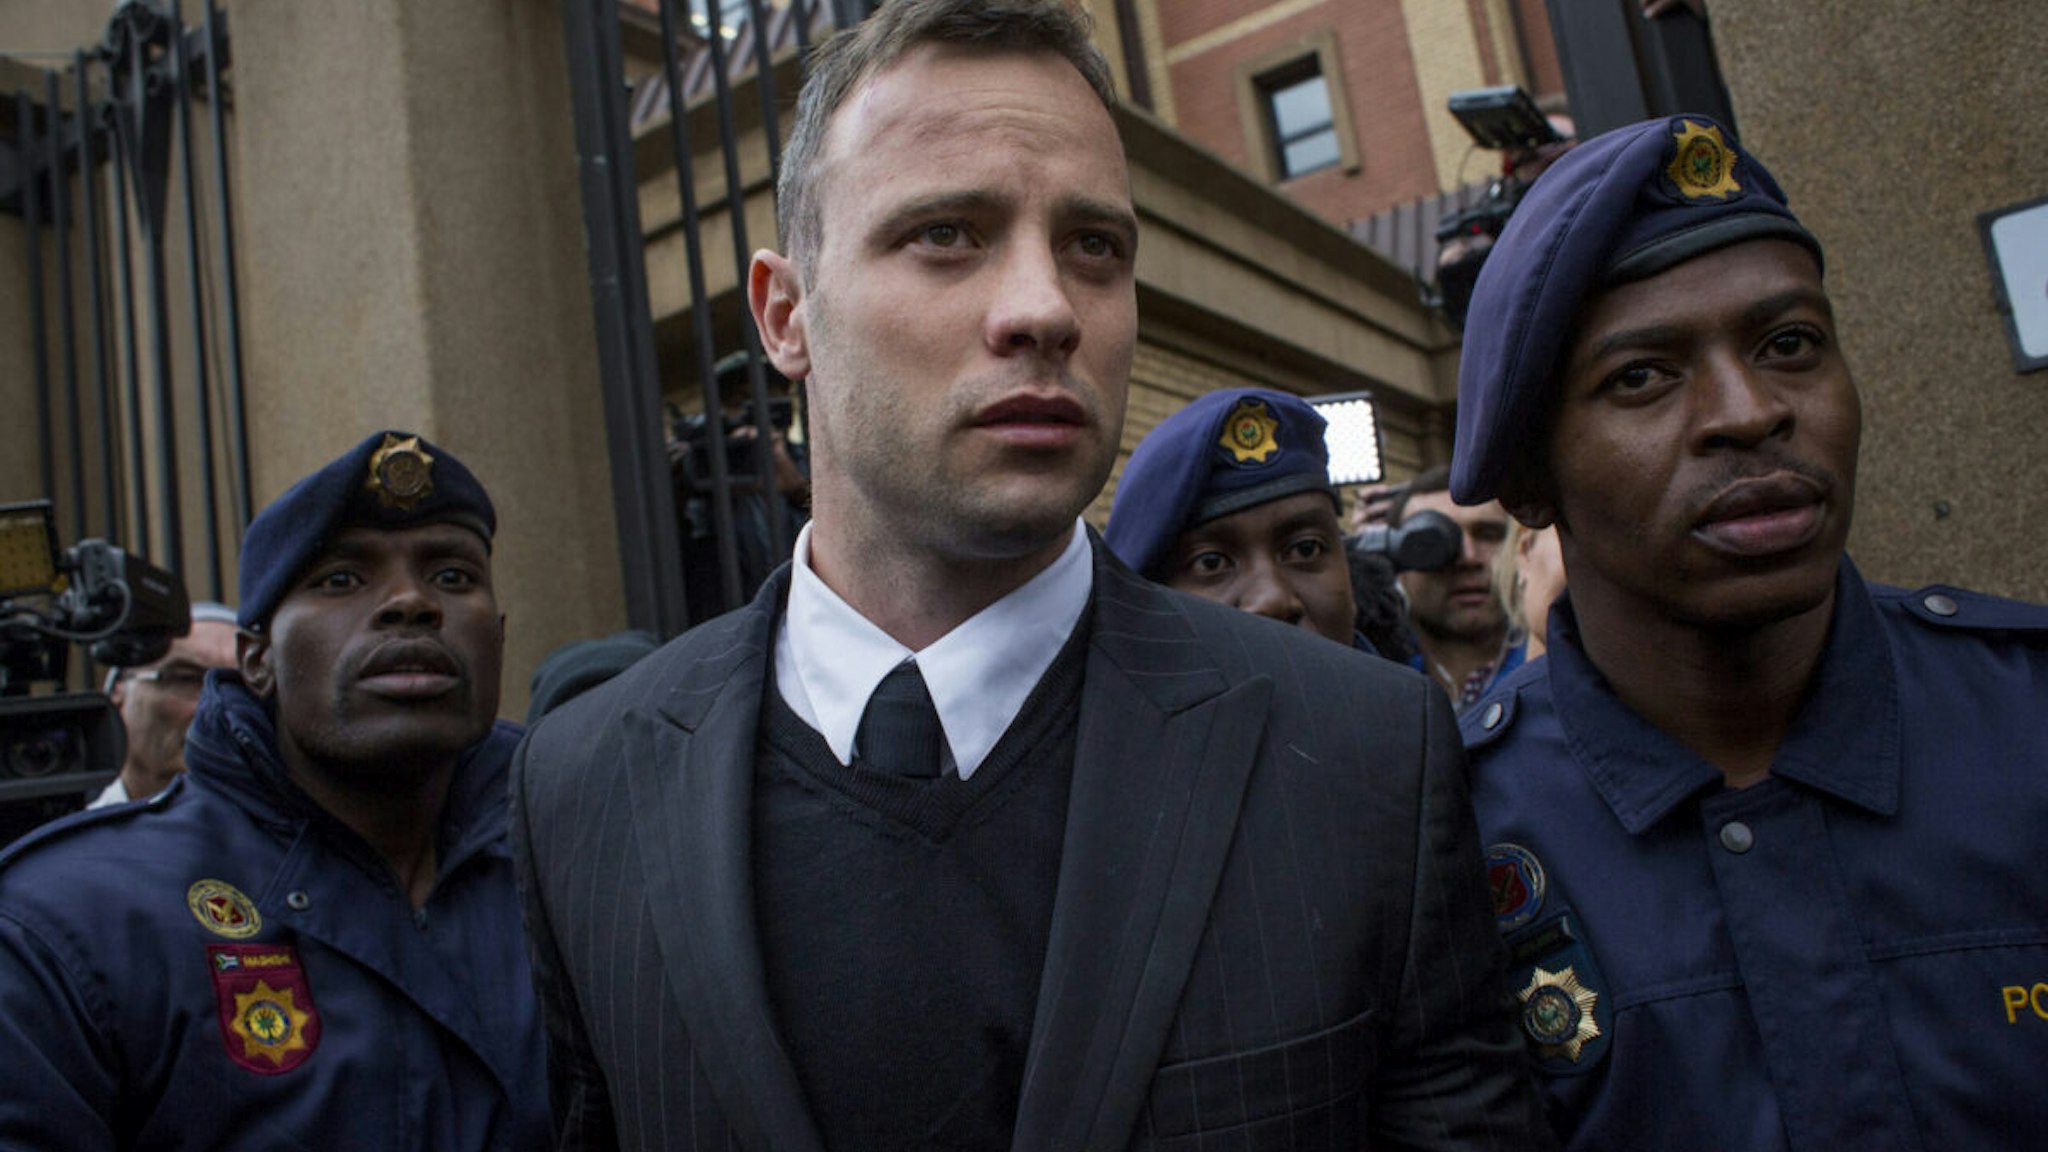 PRETORIA, SOUTH AFRICA - JUNE 14 : Oscar Pistorius leaves the North Gauteng High Court on June 14, 2016 in Pretoria, South Africa. Having had his conviction upgraded to murder in December 2015, Paralympian athlete Oscar Pistorius is attending his sentencing hearing and will be returned to jail for the murder of his girlfriend, Reeva Steenkamp, on February 14th 2013. The hearing is expected to last five days.